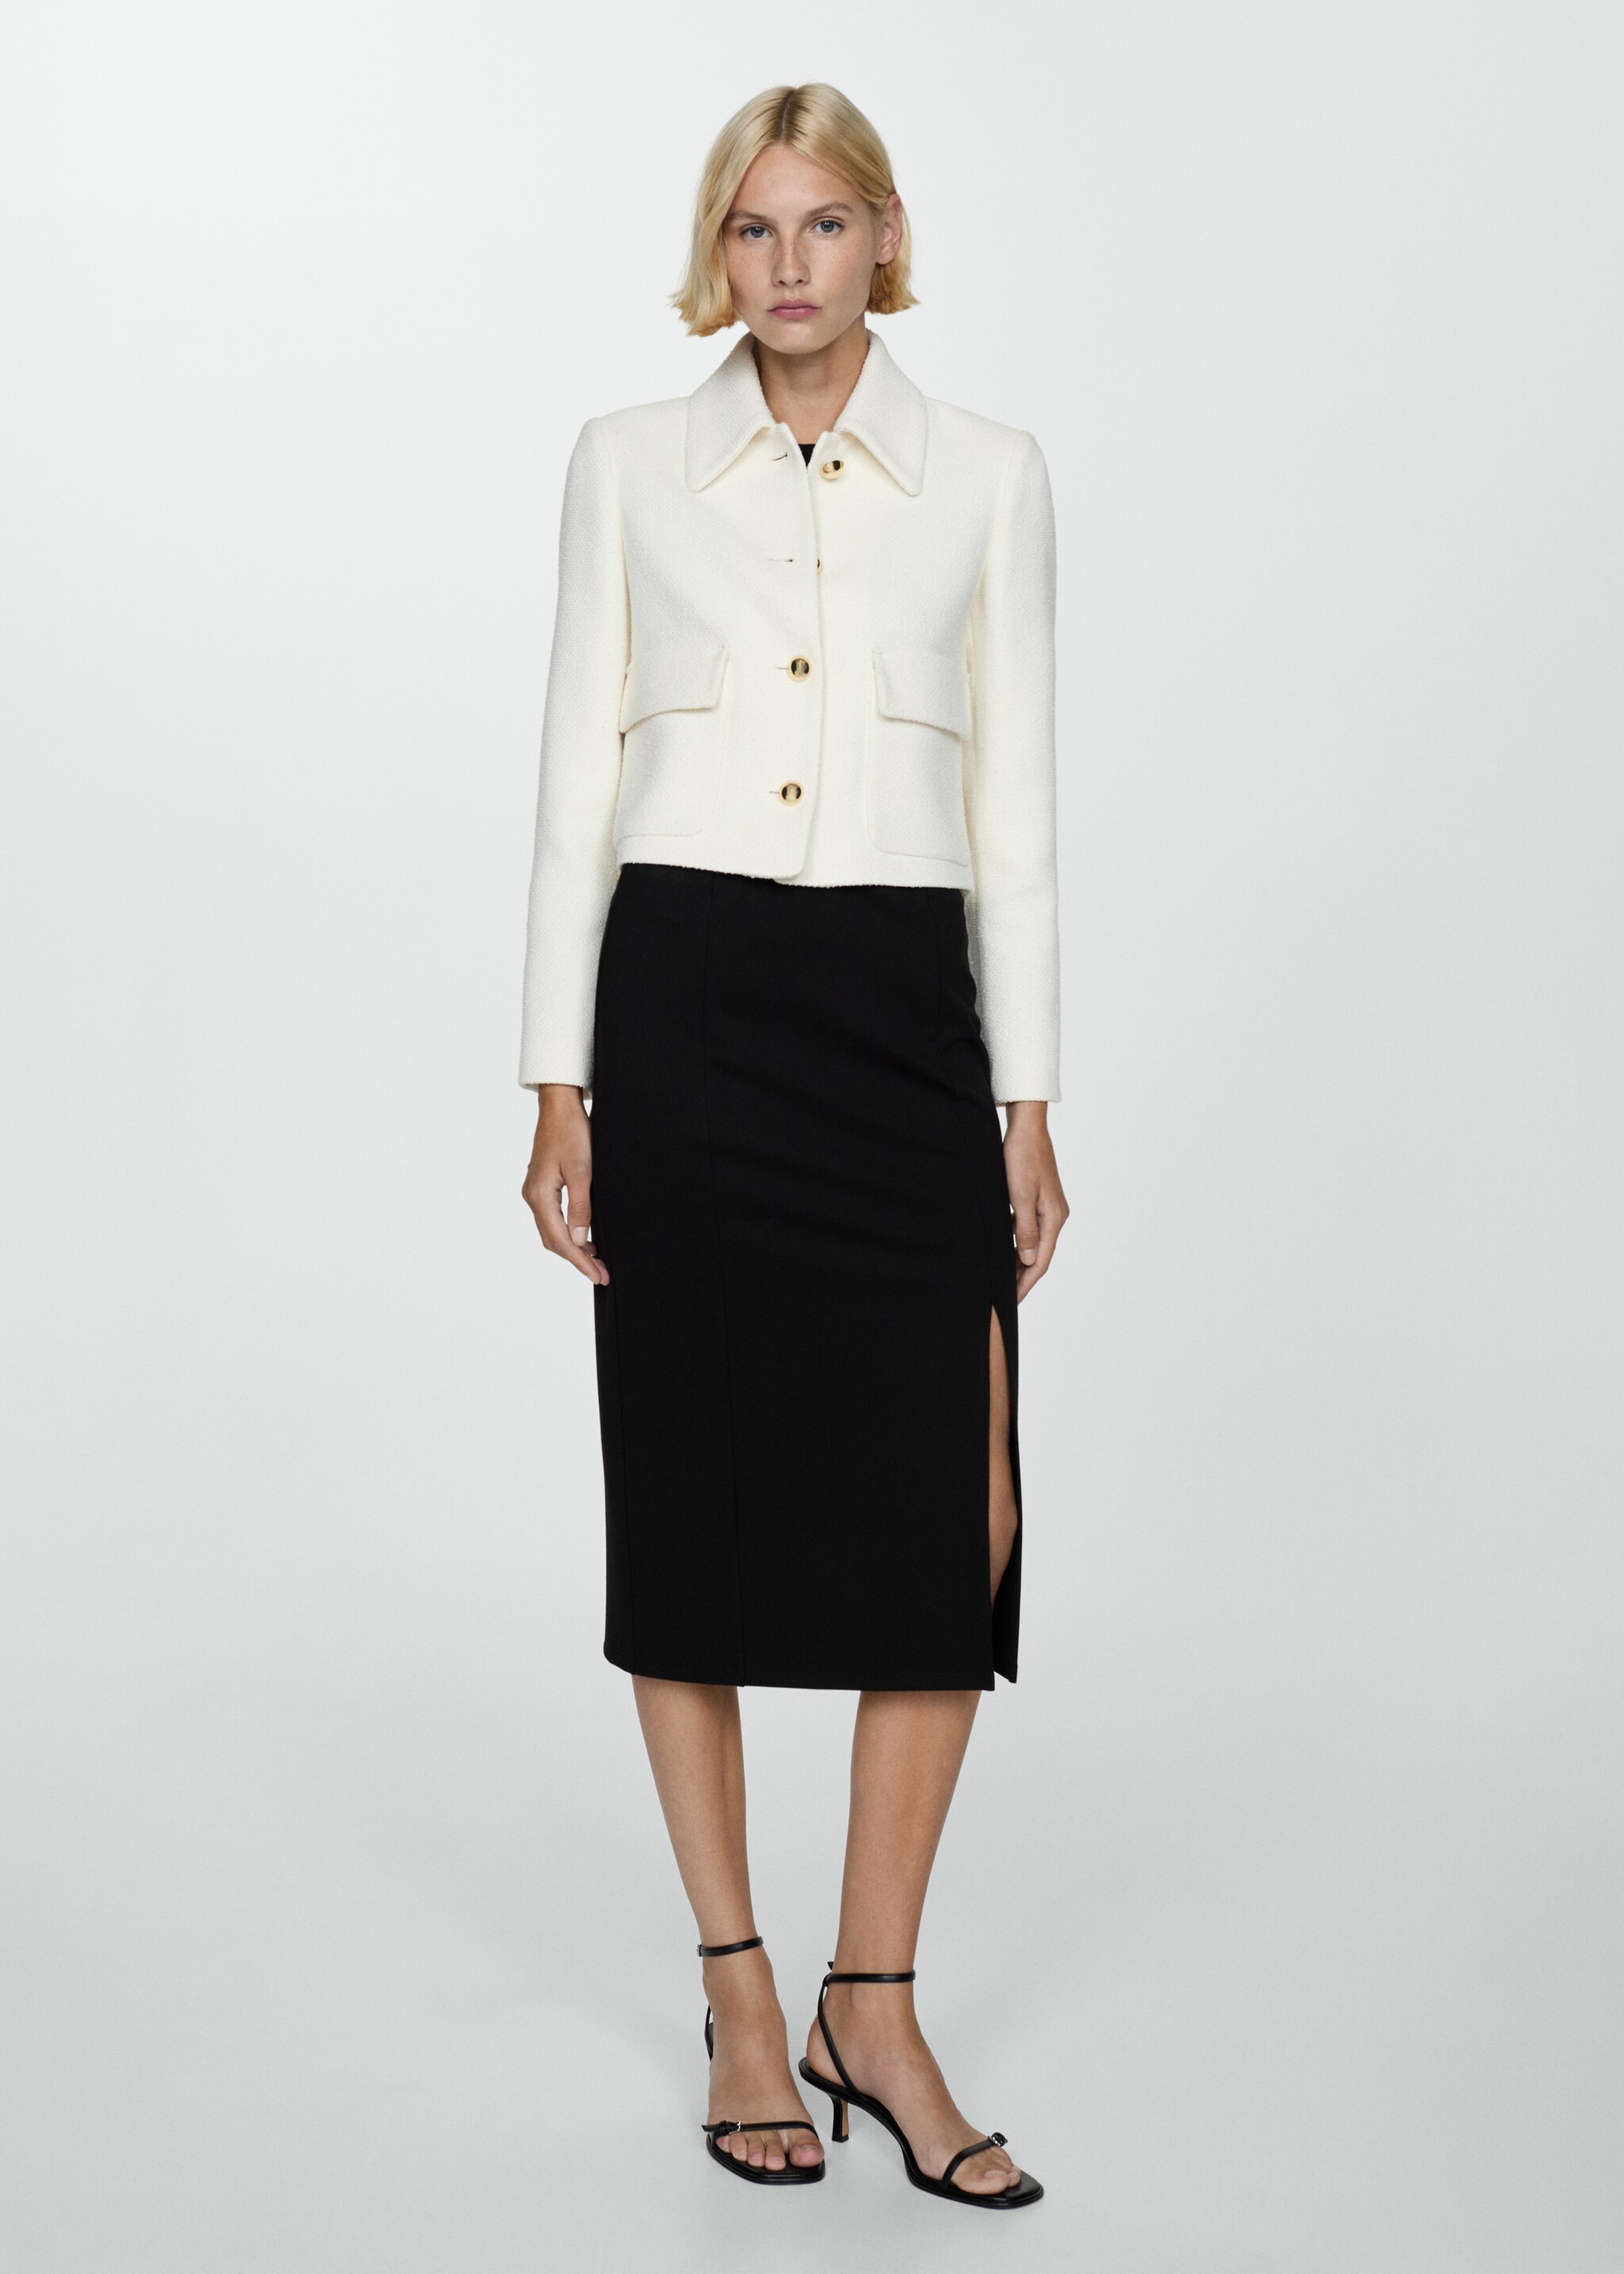 Pencil skirt with Rome-knit opening - General plane